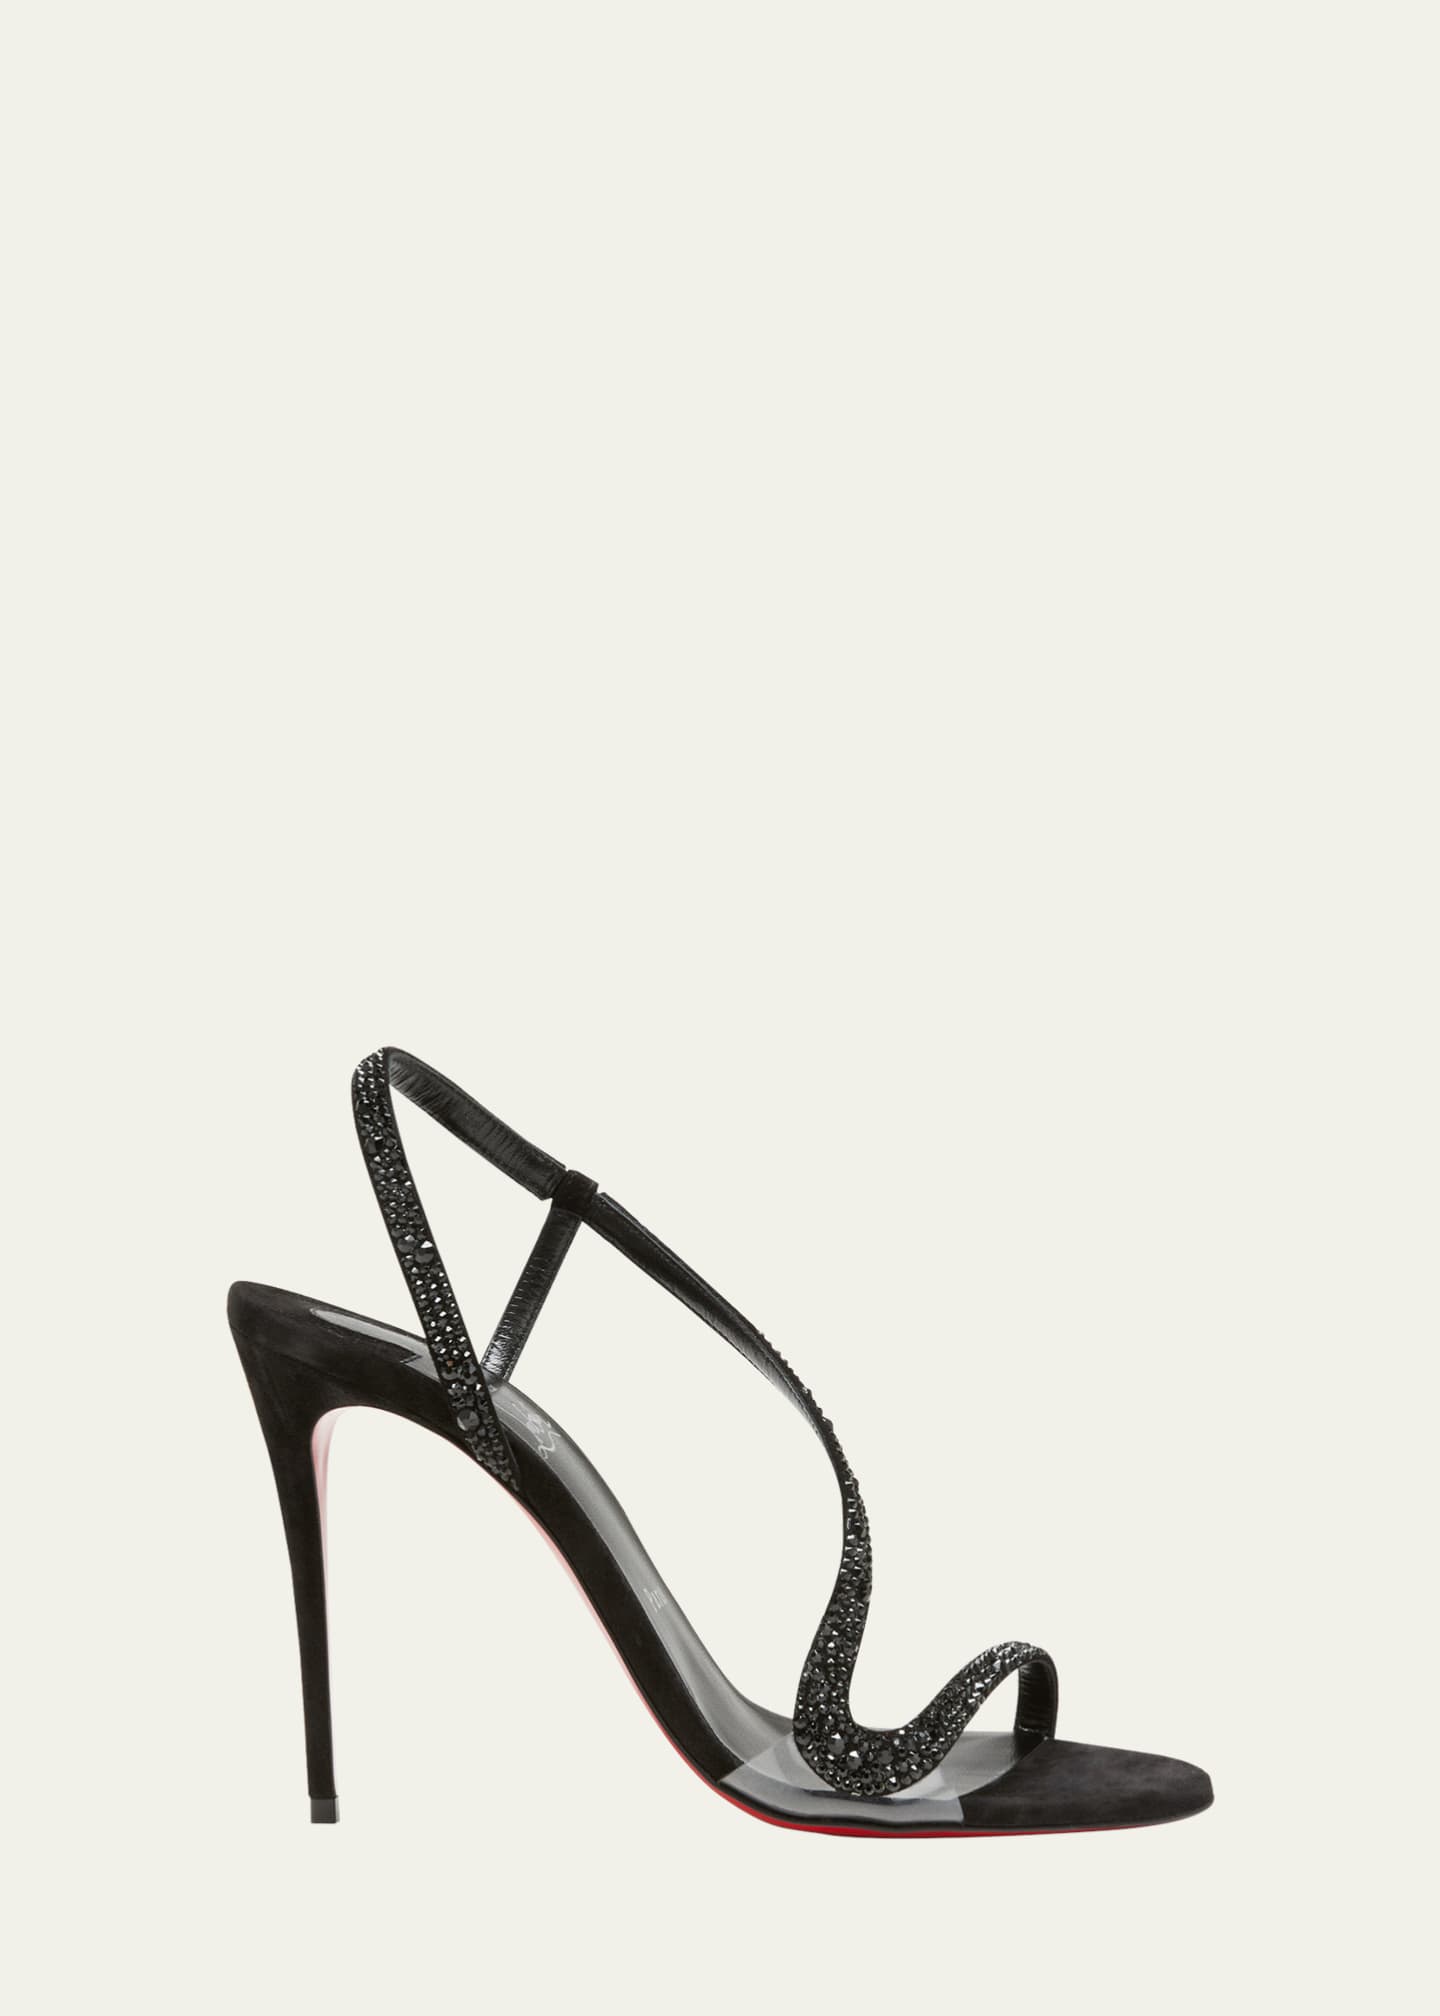 Christian Louboutin Rosalie Strass Red Sole Stiletto Sandals - Bergdorf ...